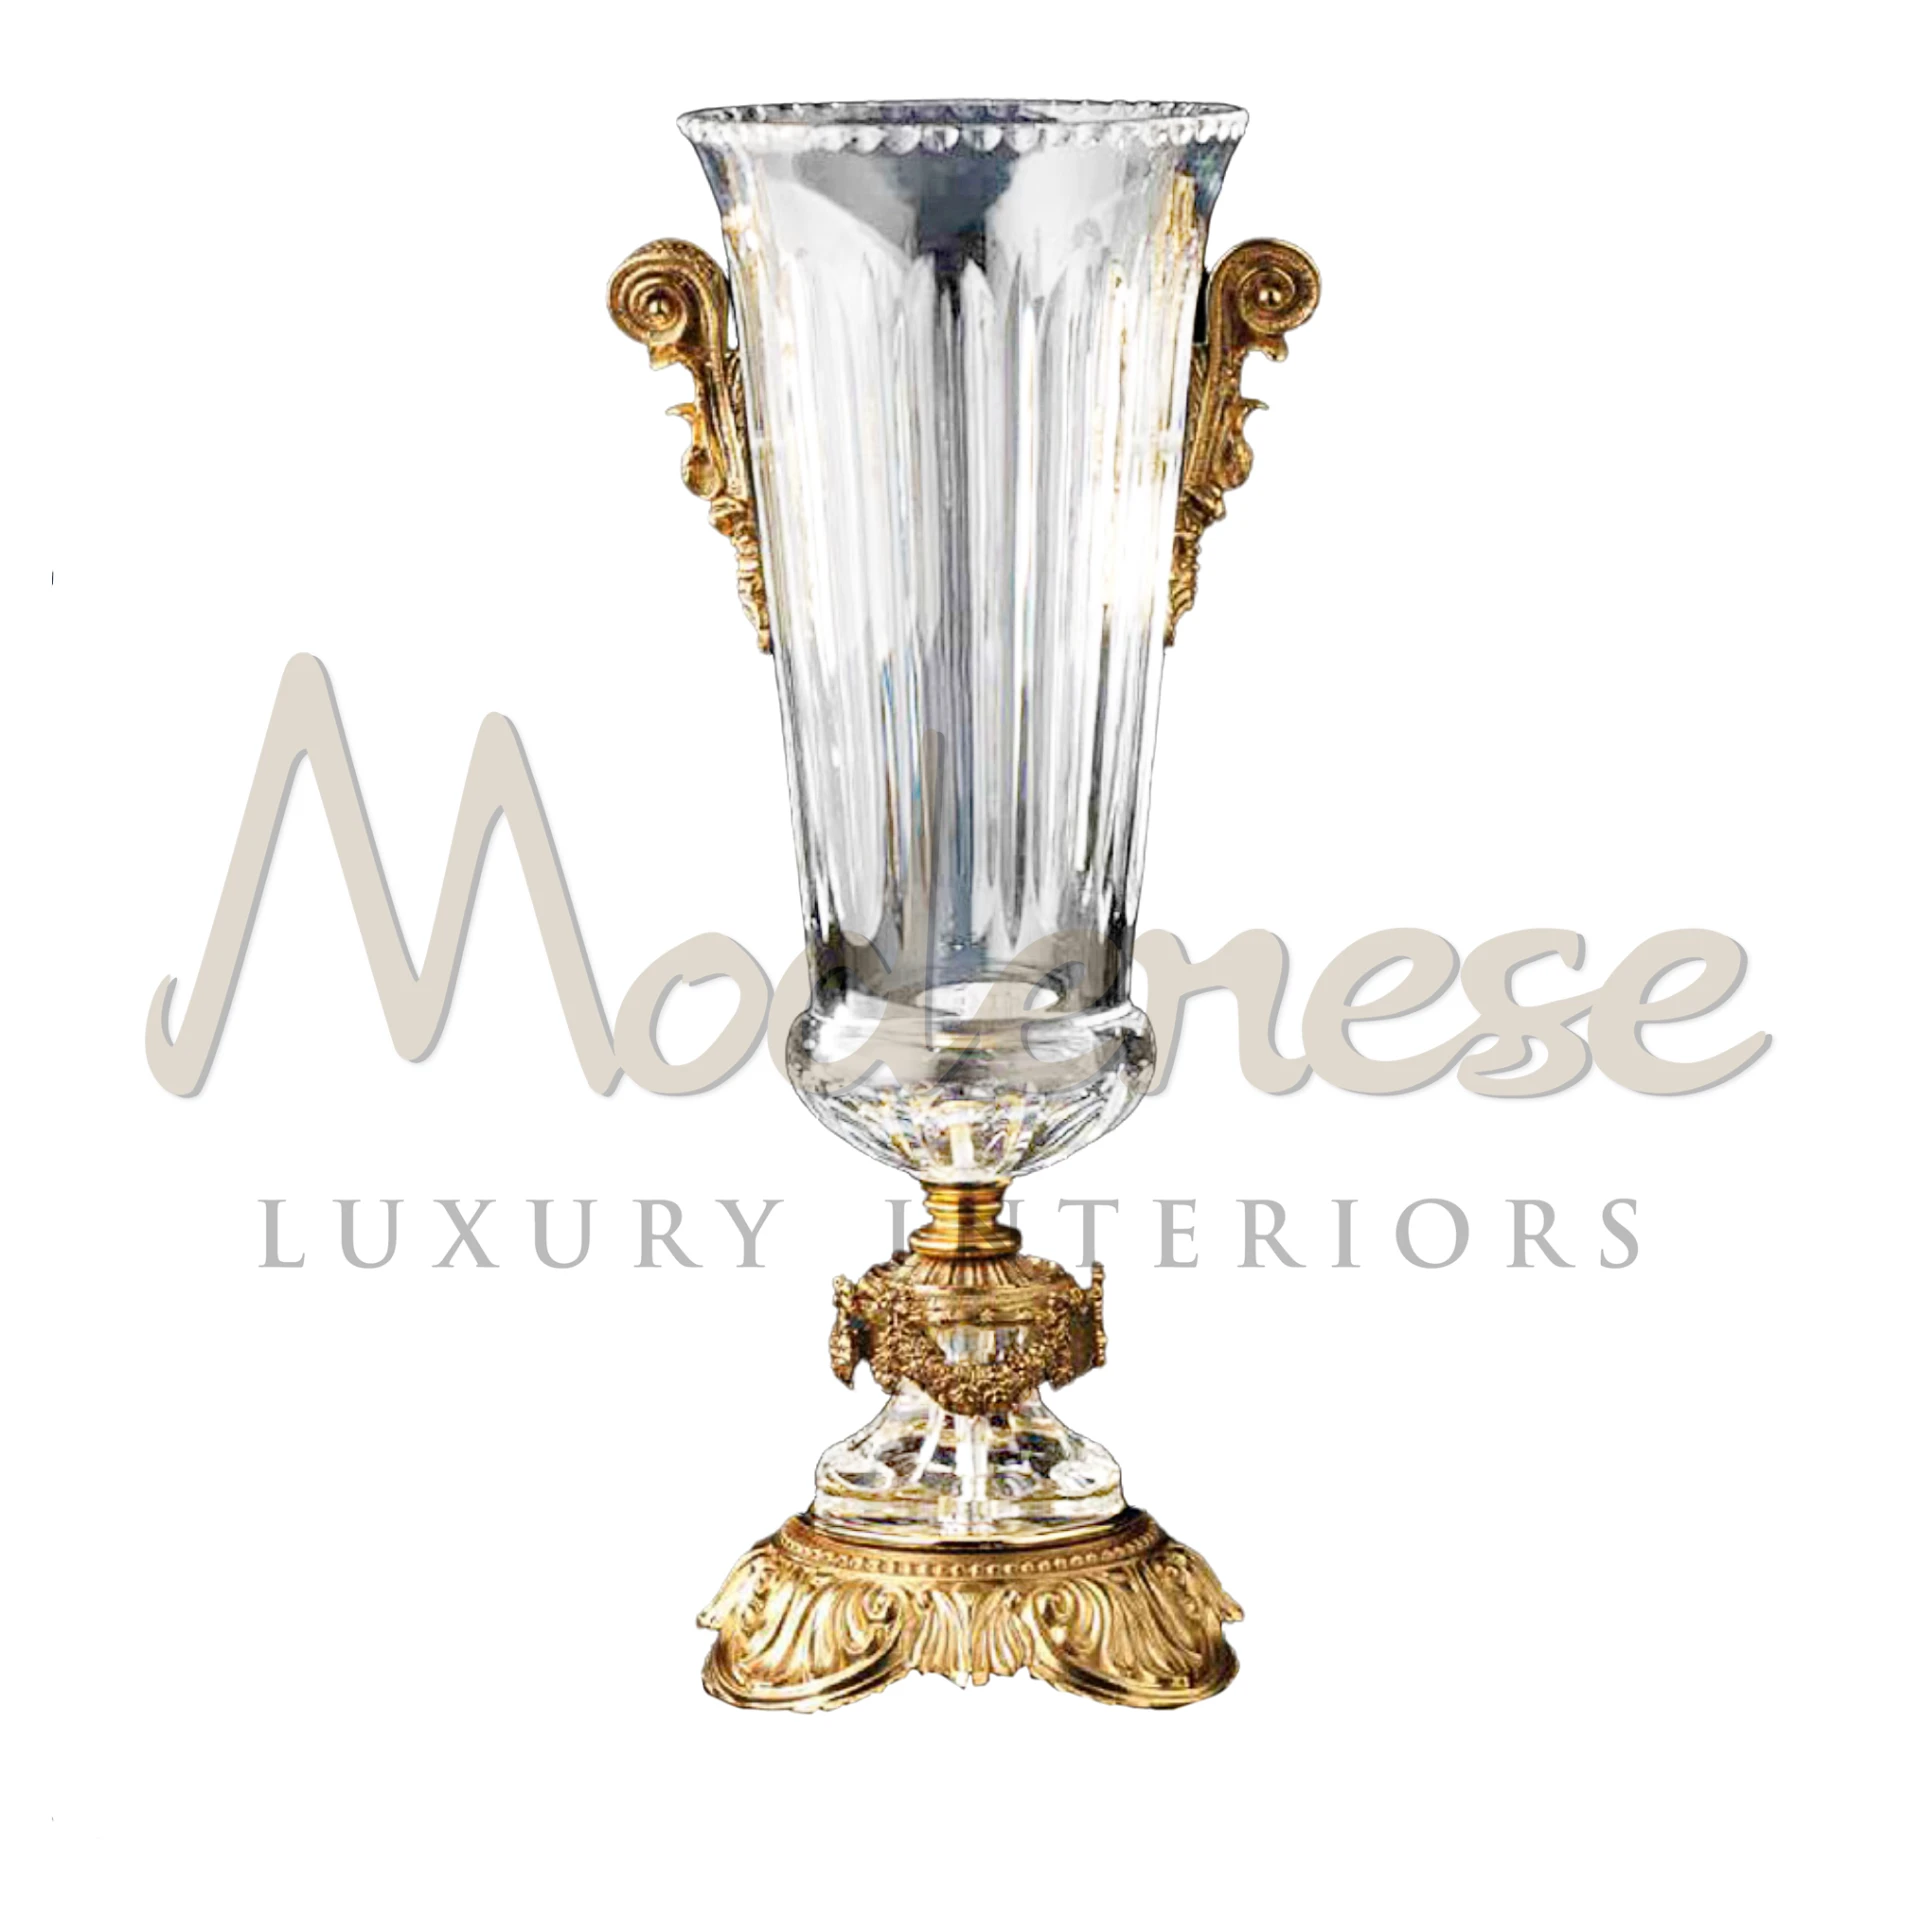 Gorgeous Crystal Tall Vase, blending classic and modern styles with intricate designs, epitomizes luxury and elegance in interior design.